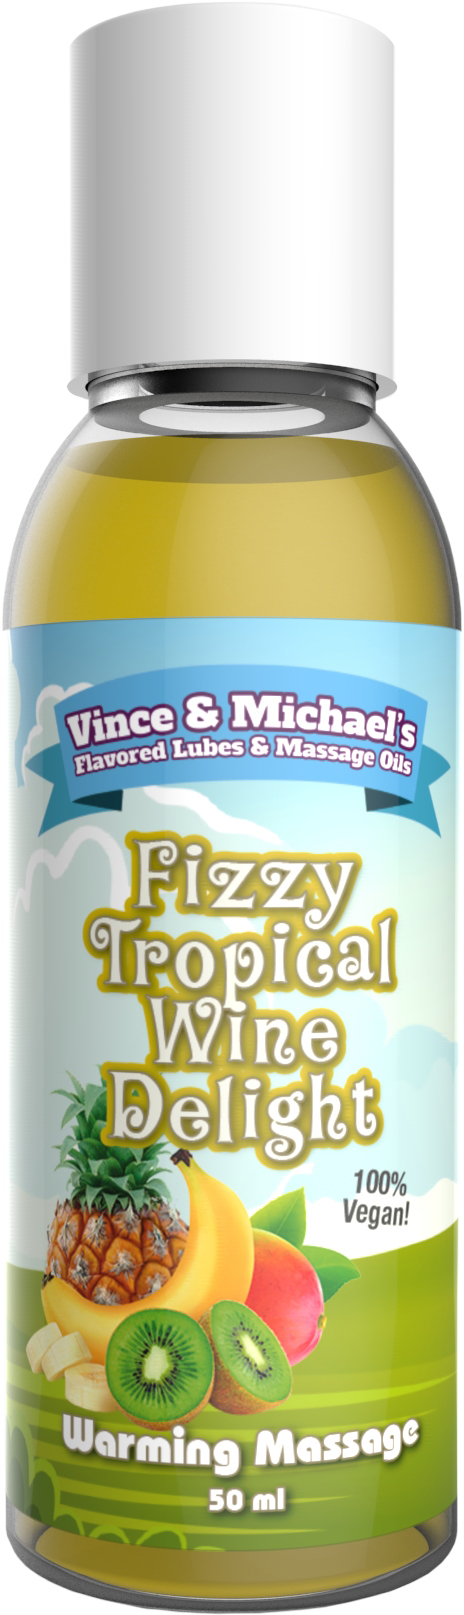 VINCE & MICHAEL's Warming Fizzy Tropical Wine Delight 50ml